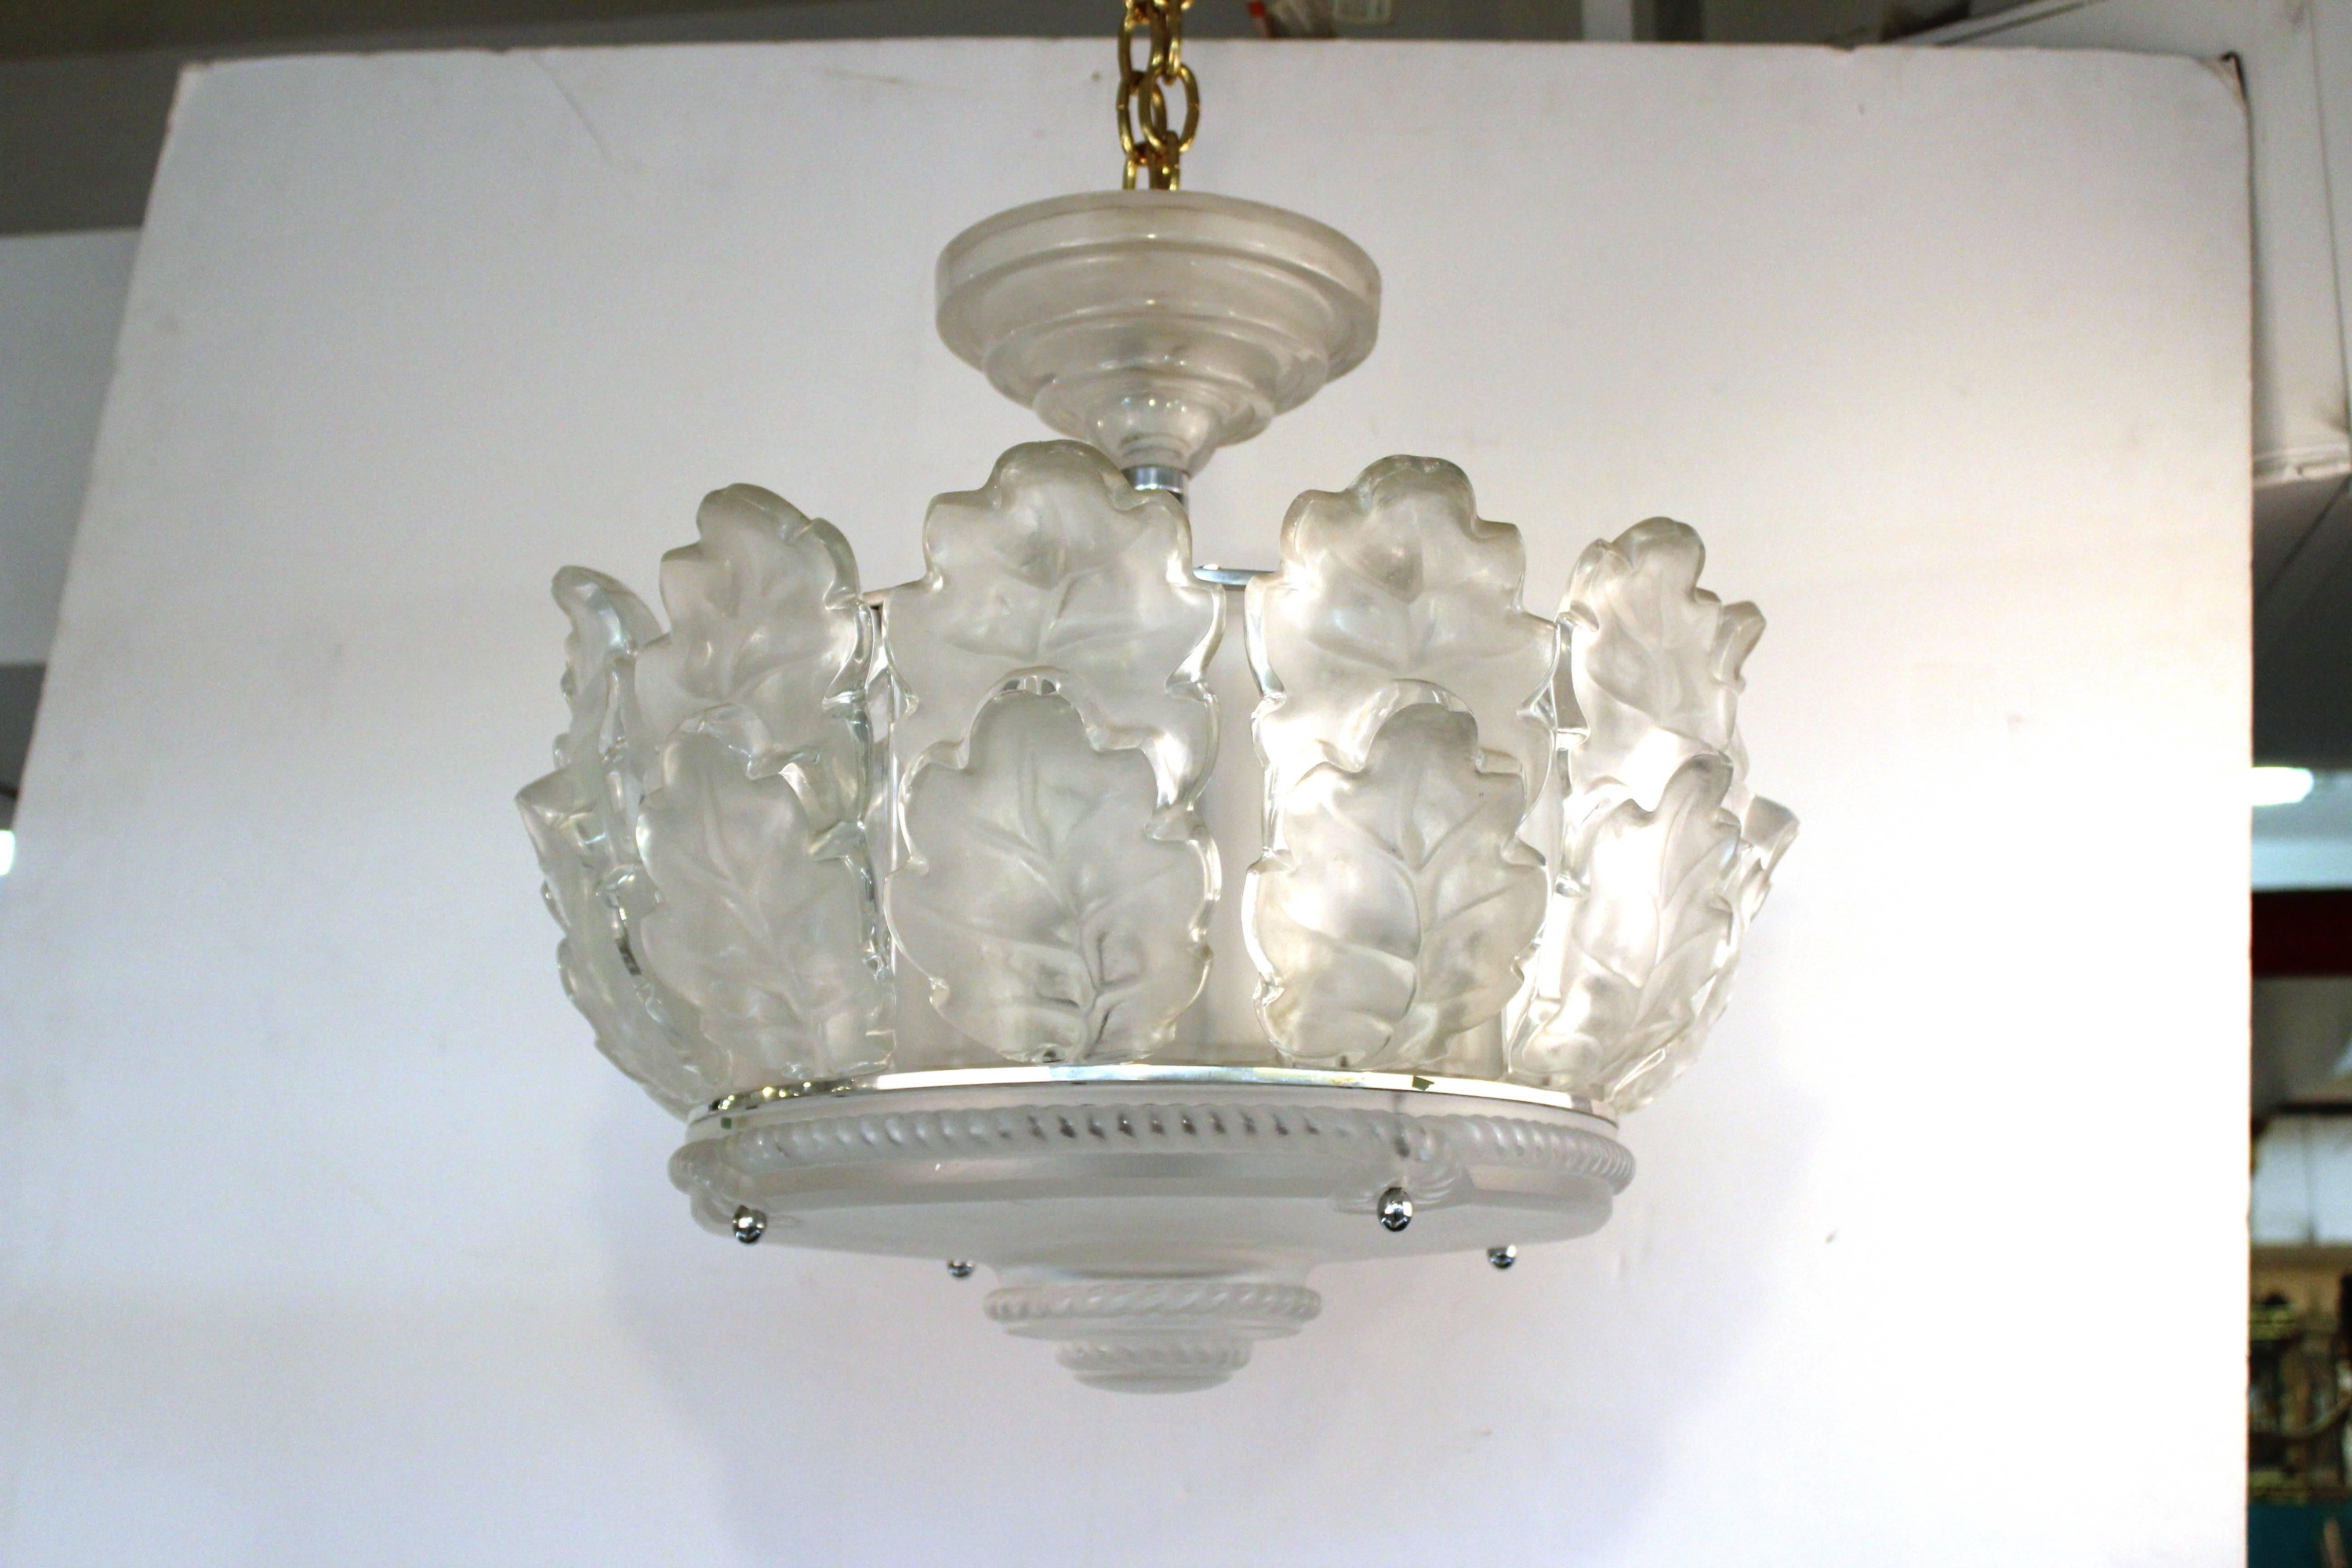 Chandelier by Lalique from the "Chene" collection which features two tiers of frosted glass oak leaves.